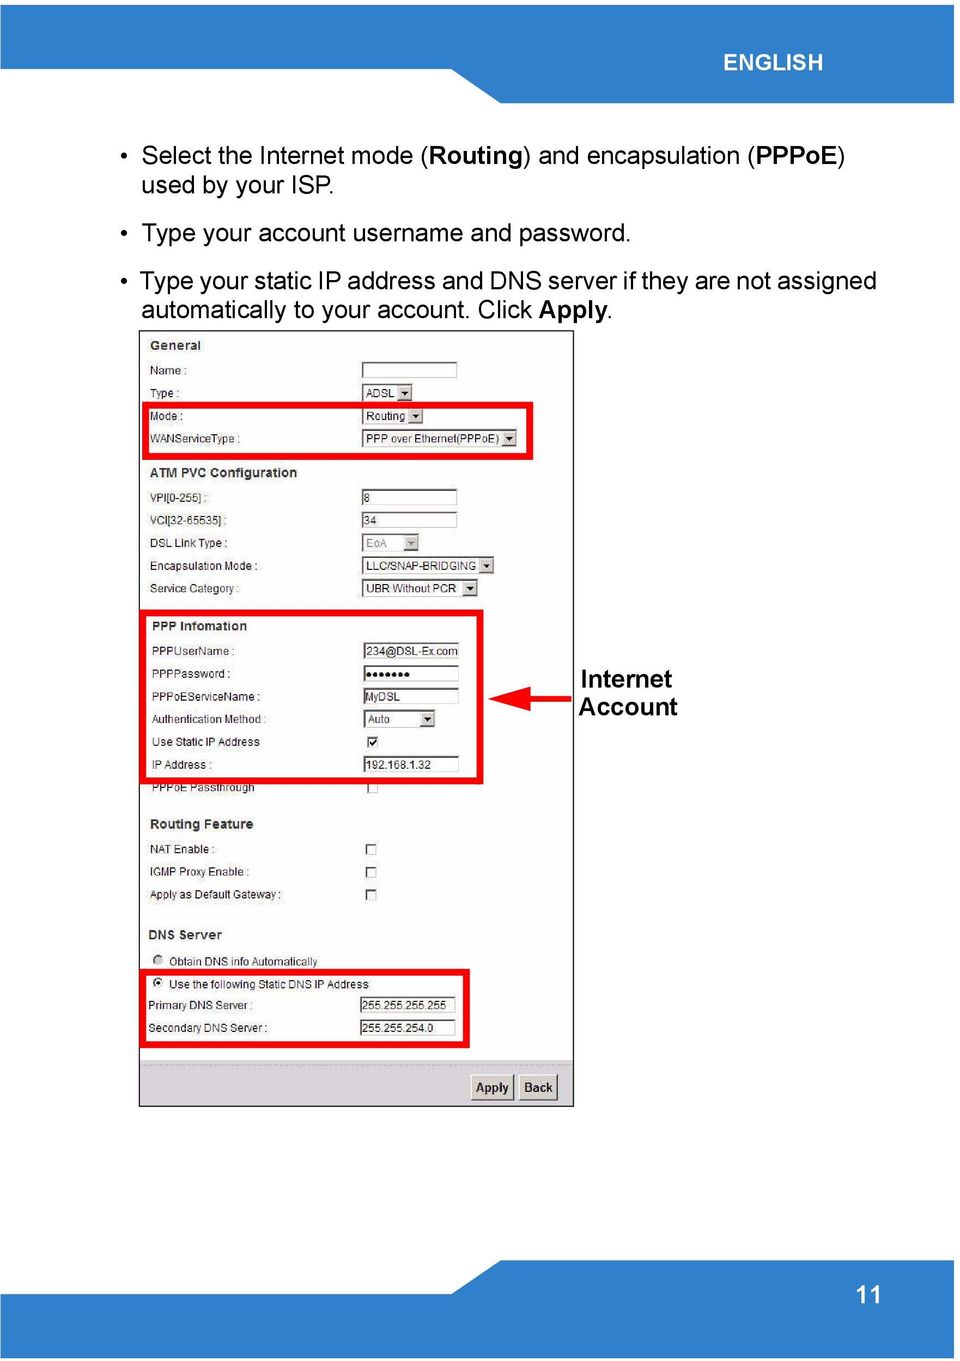 Type your account username and password.